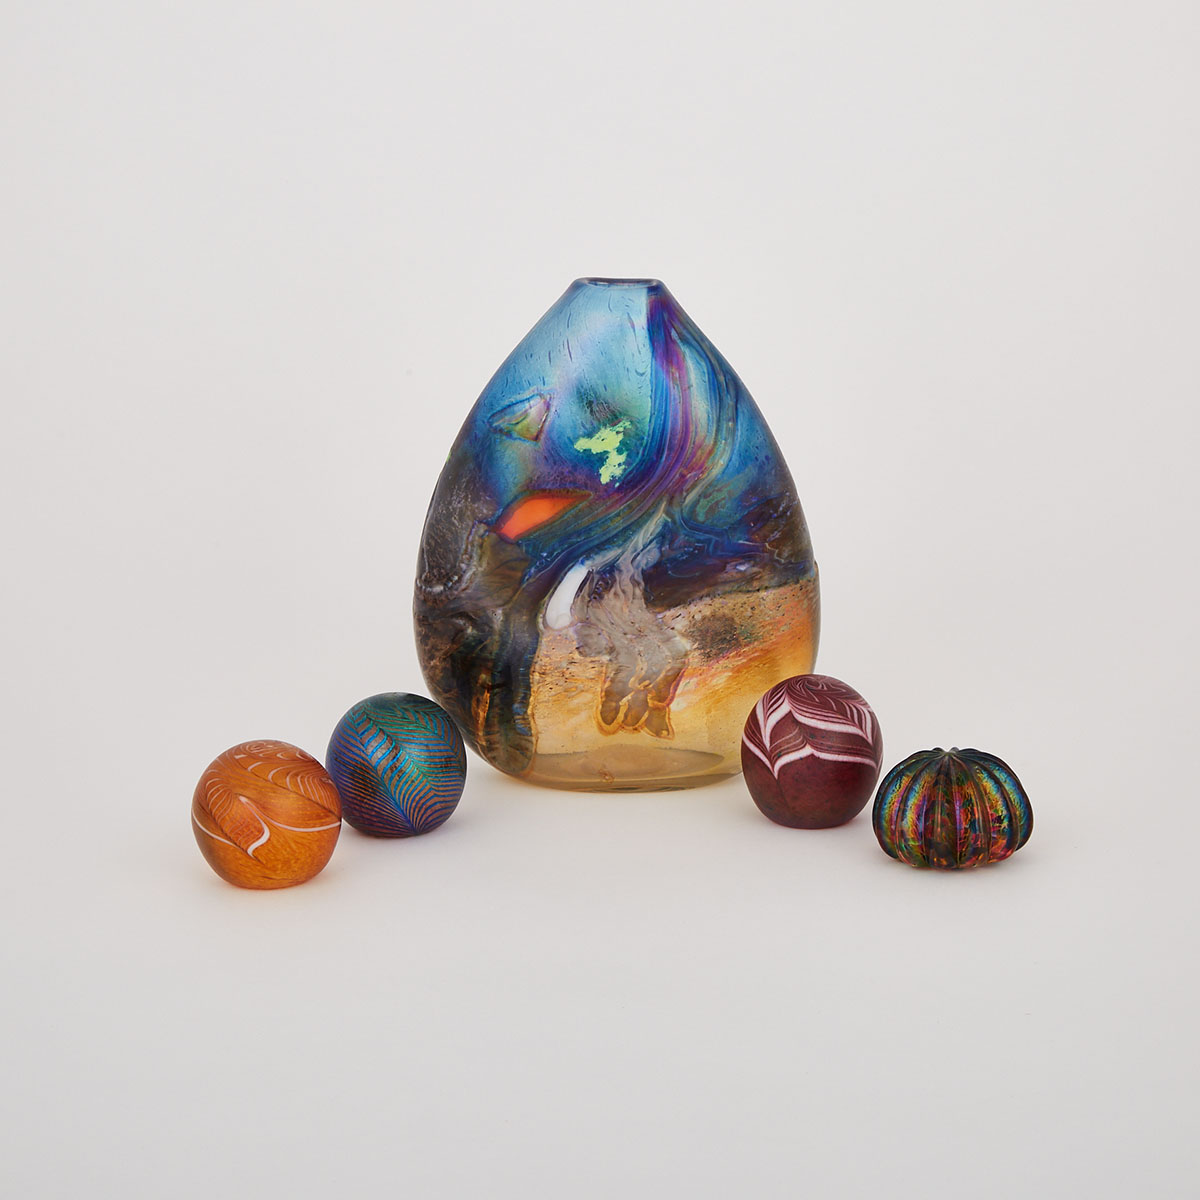 Robert Held (American-Canadian, b.1943), Decorated Iridescent Glass Vase and Four Paperweights, c.1990-2000